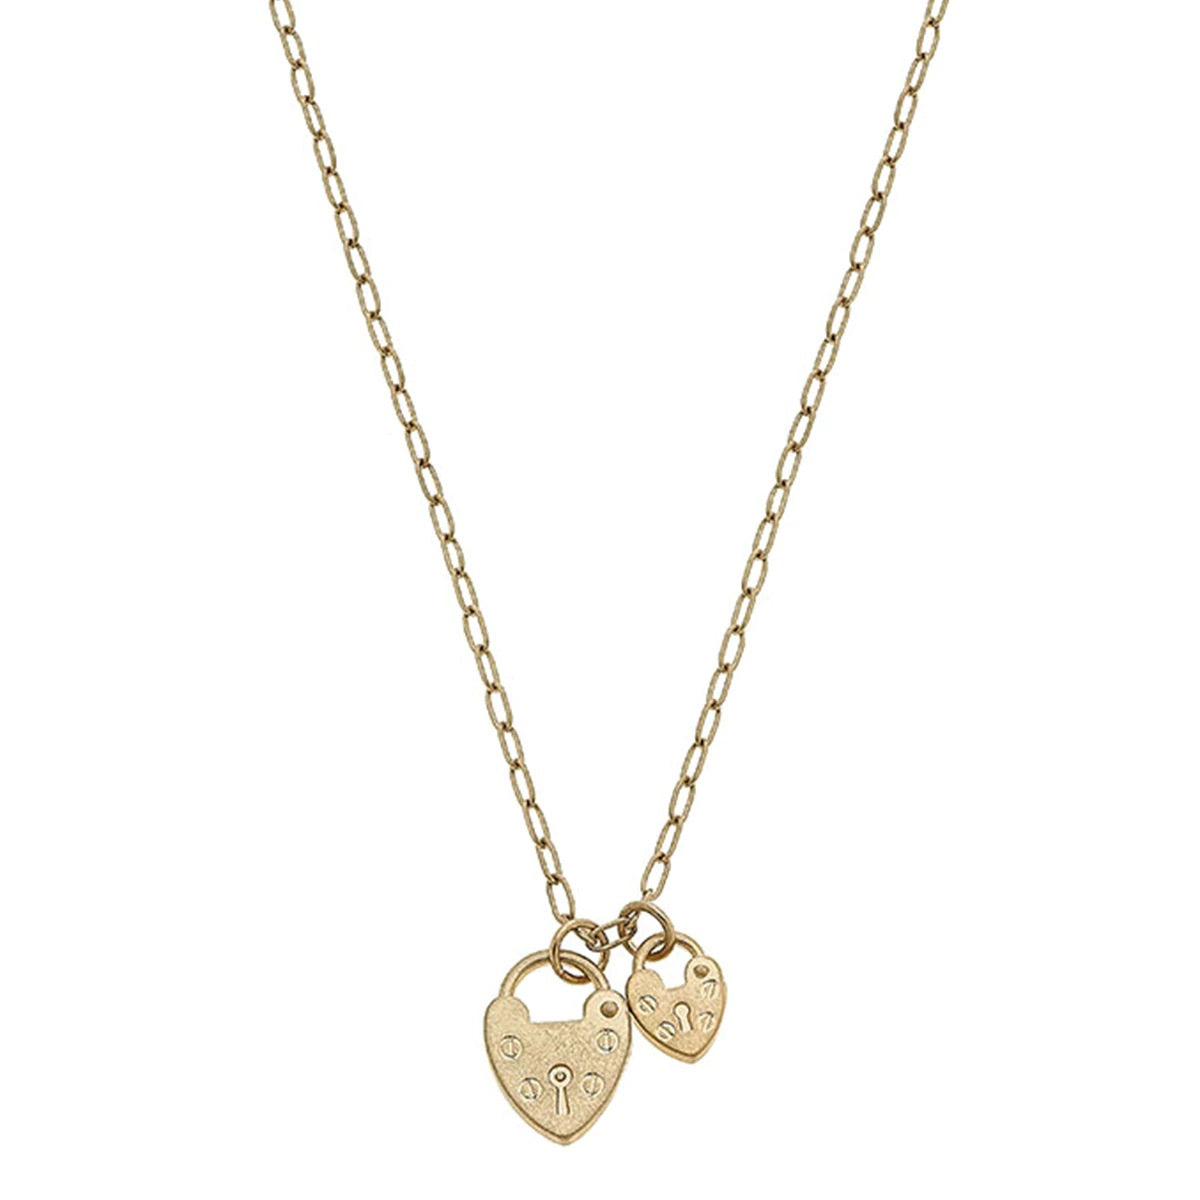 Necklaces- Canvas Mia Heart Padlock Charms Necklace in Worn Gold